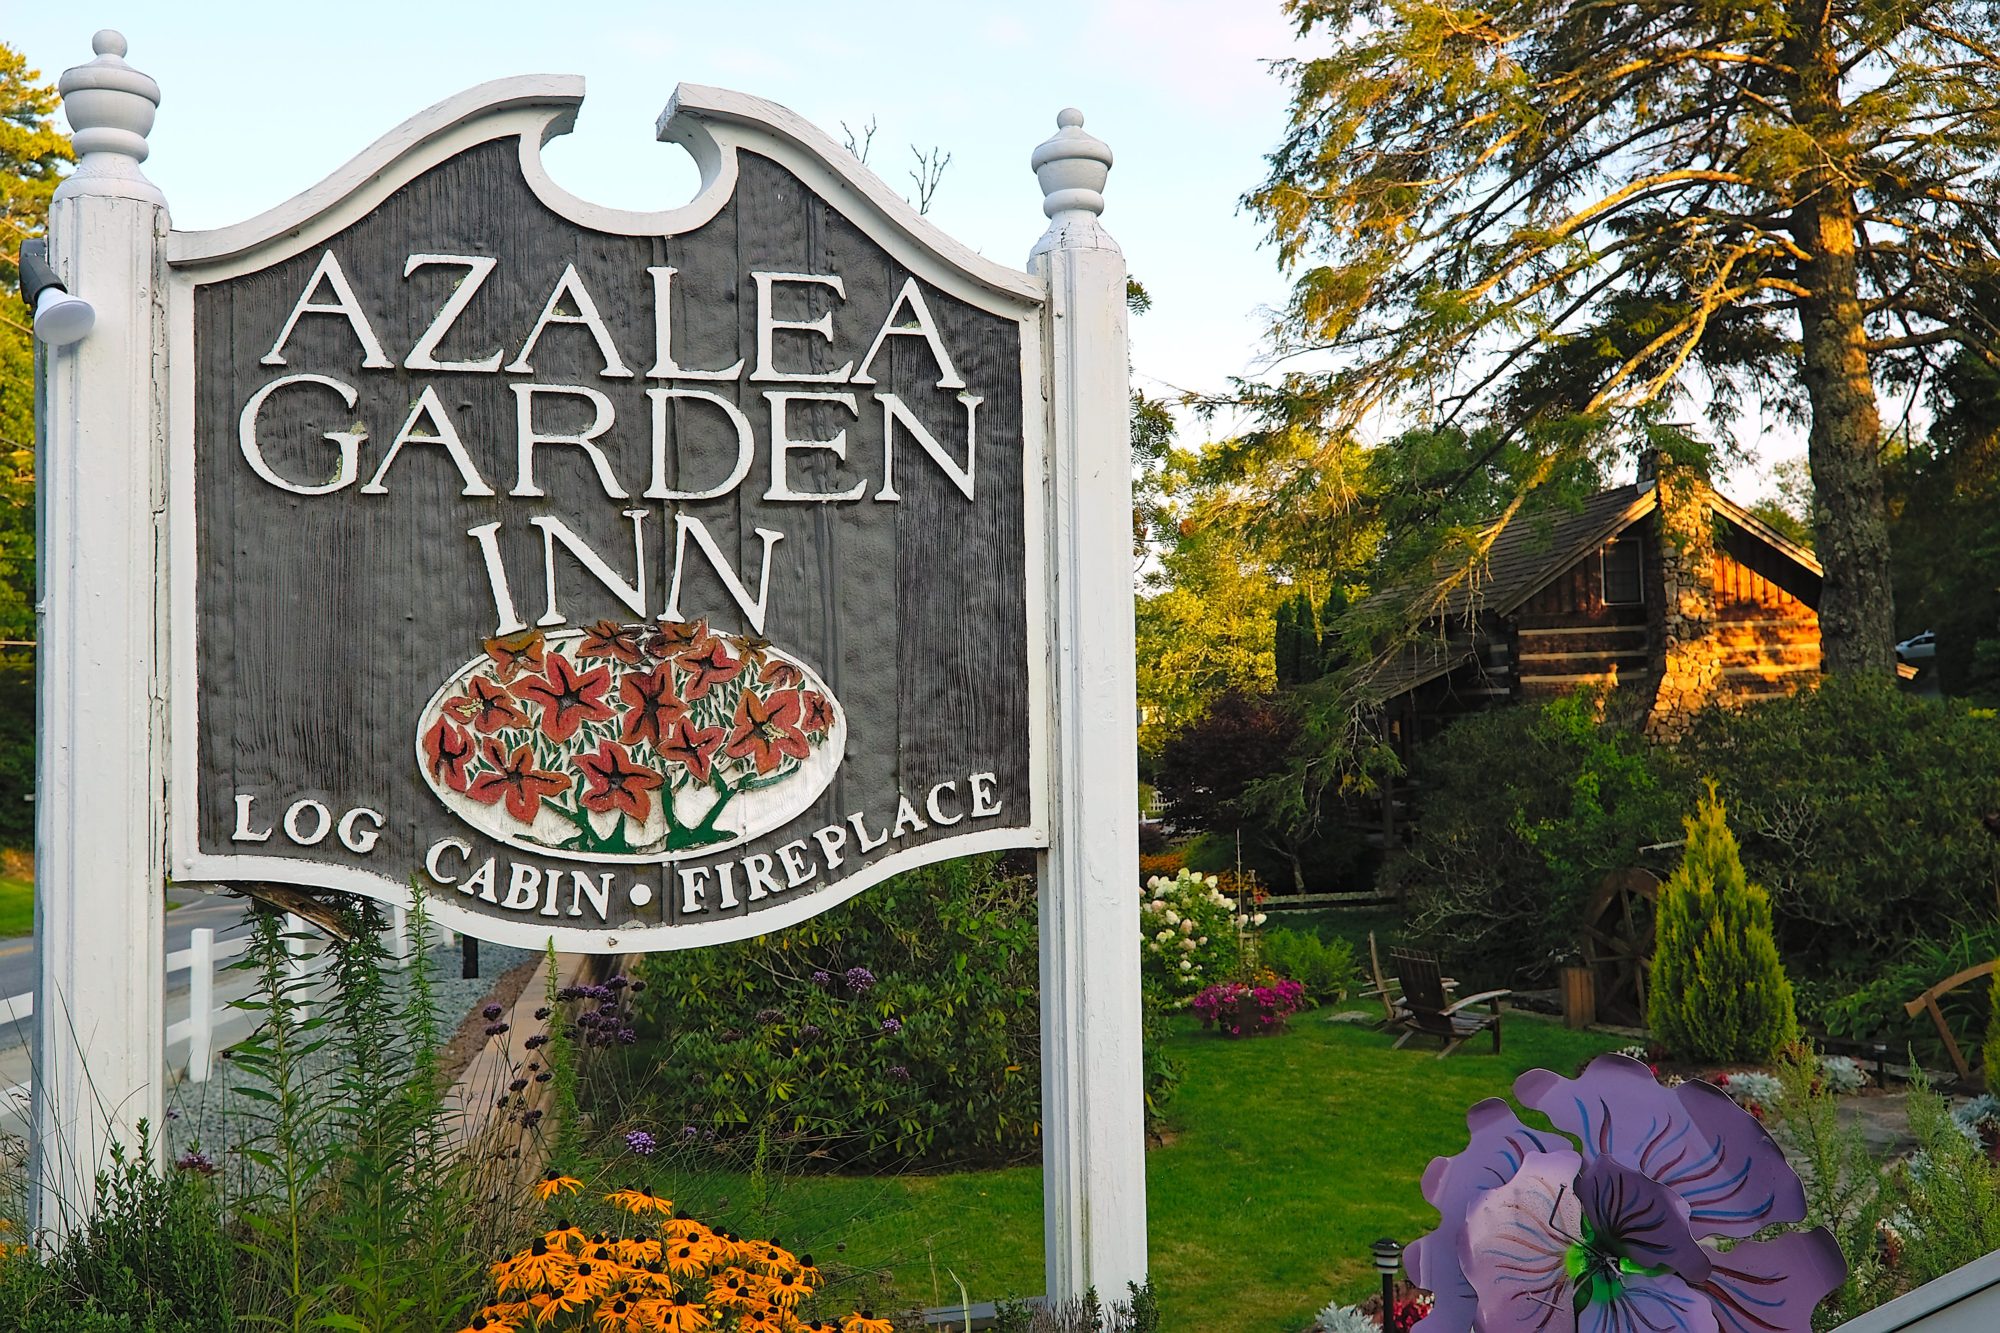 The sign for the Azalea Garden Inn with the log cabin in the background